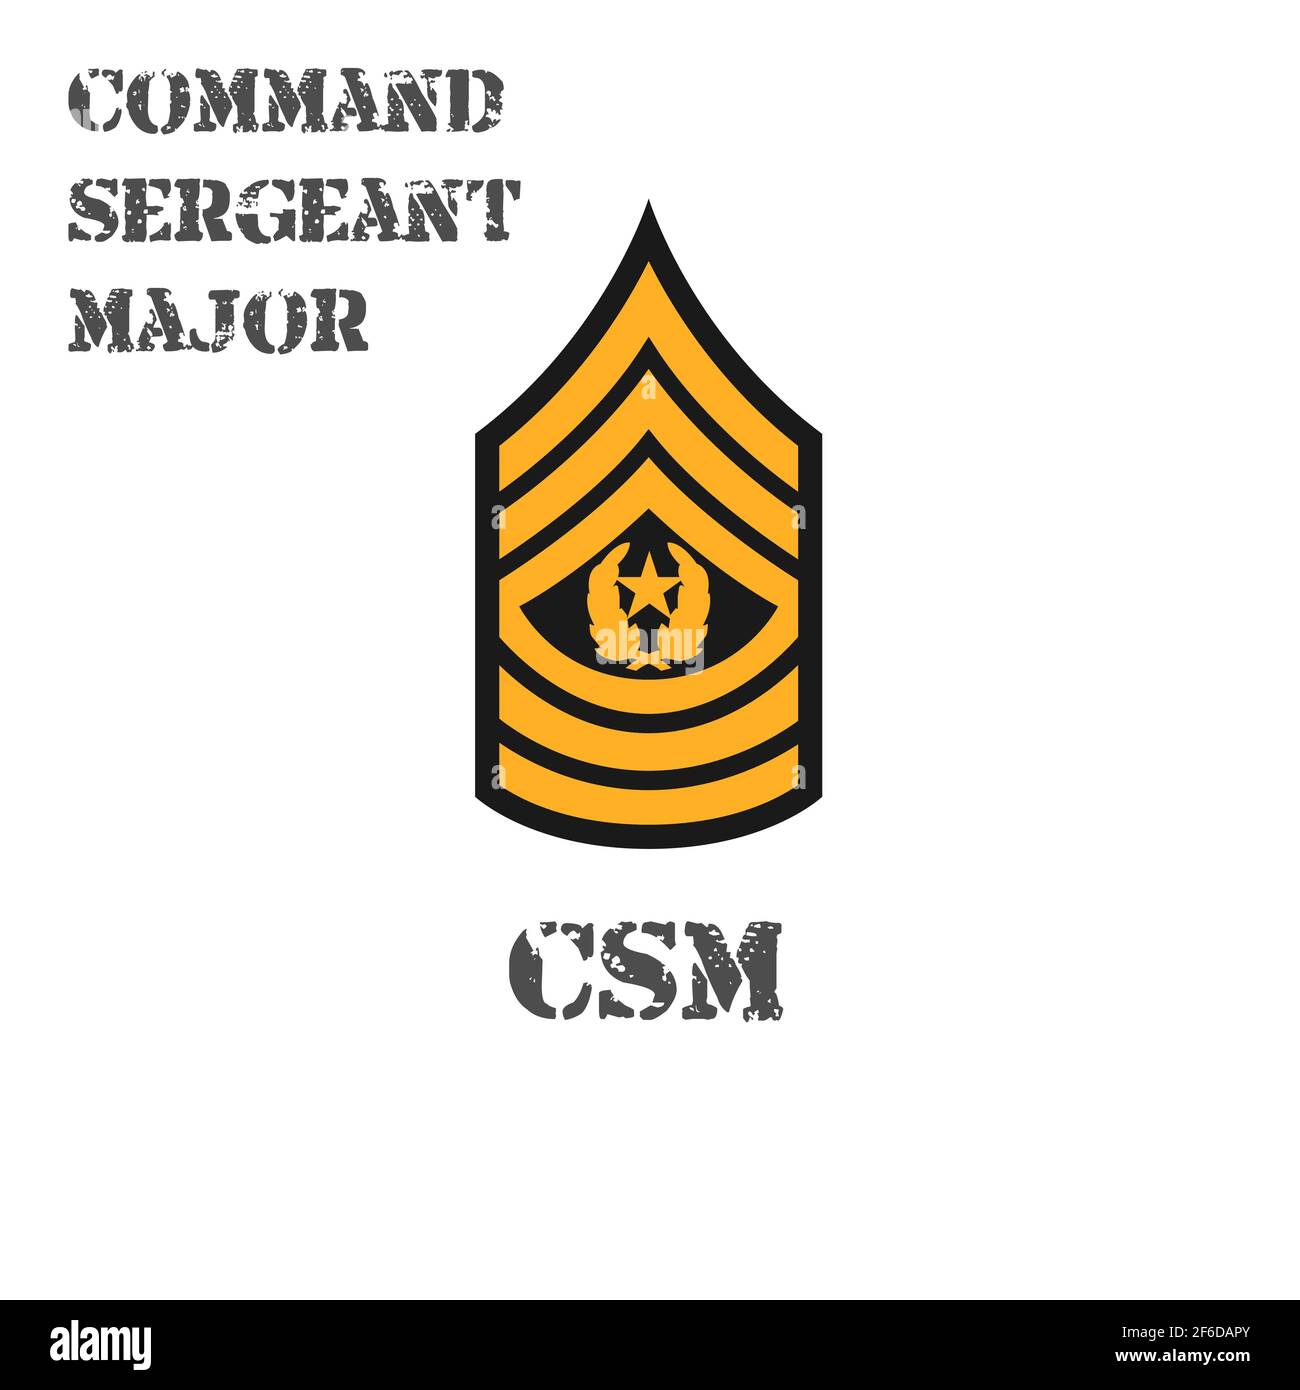 Realistic vector icon of the chevron of the command sergeant major of the US Army. Description and abbreviated name. Stock Vector